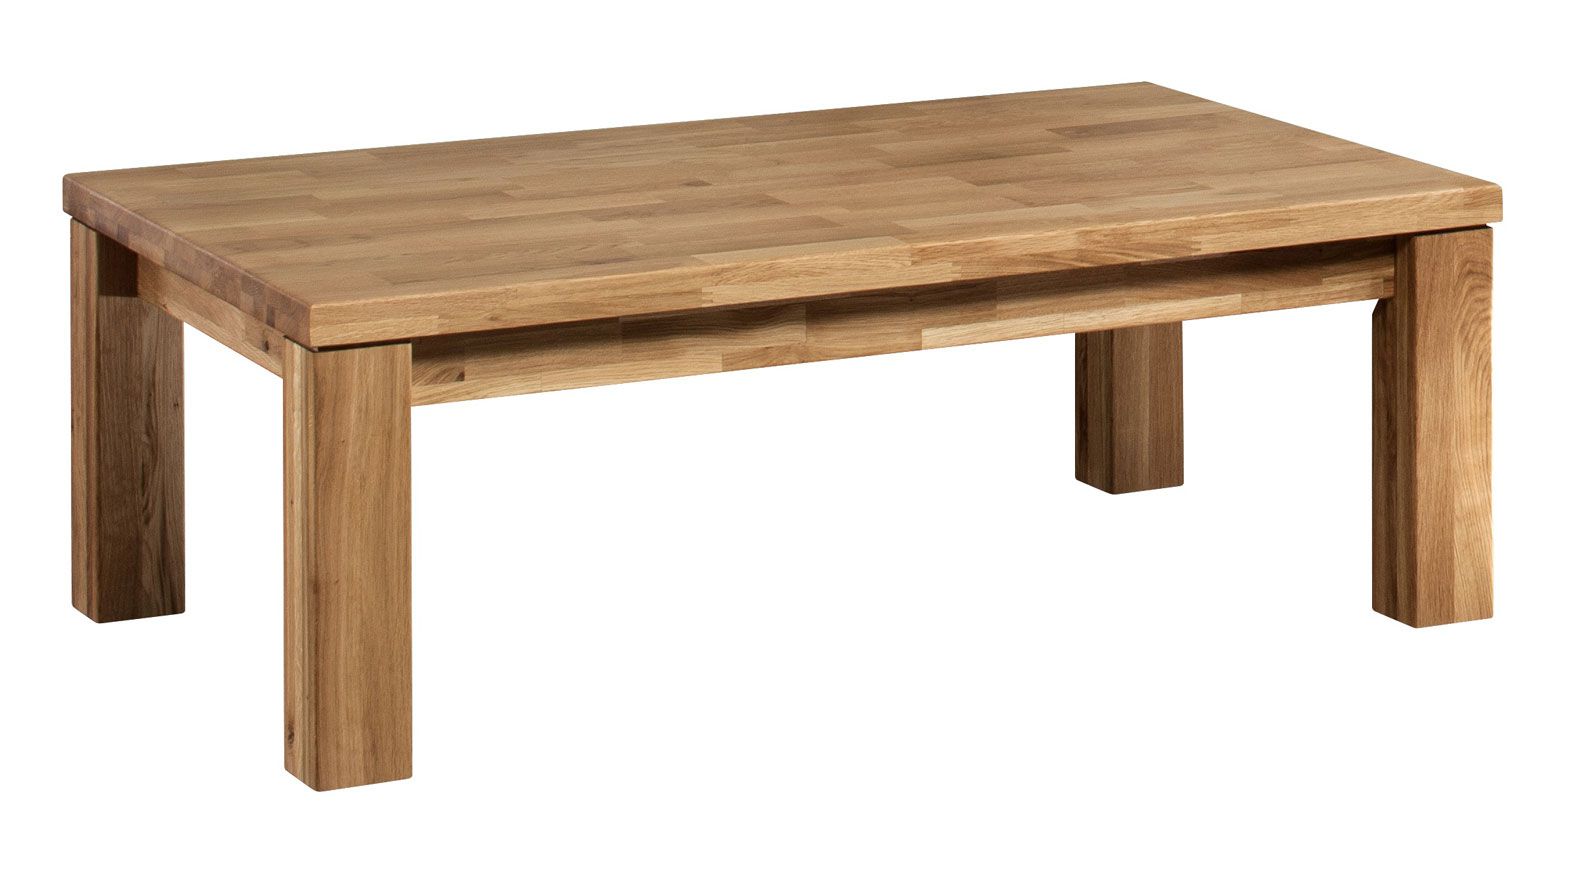 Coffee table made of solid oak wood Floresta 02, with grain, natural, oiled / waxed, 120 x 75 x 44 cm, for living room, modern and simple design